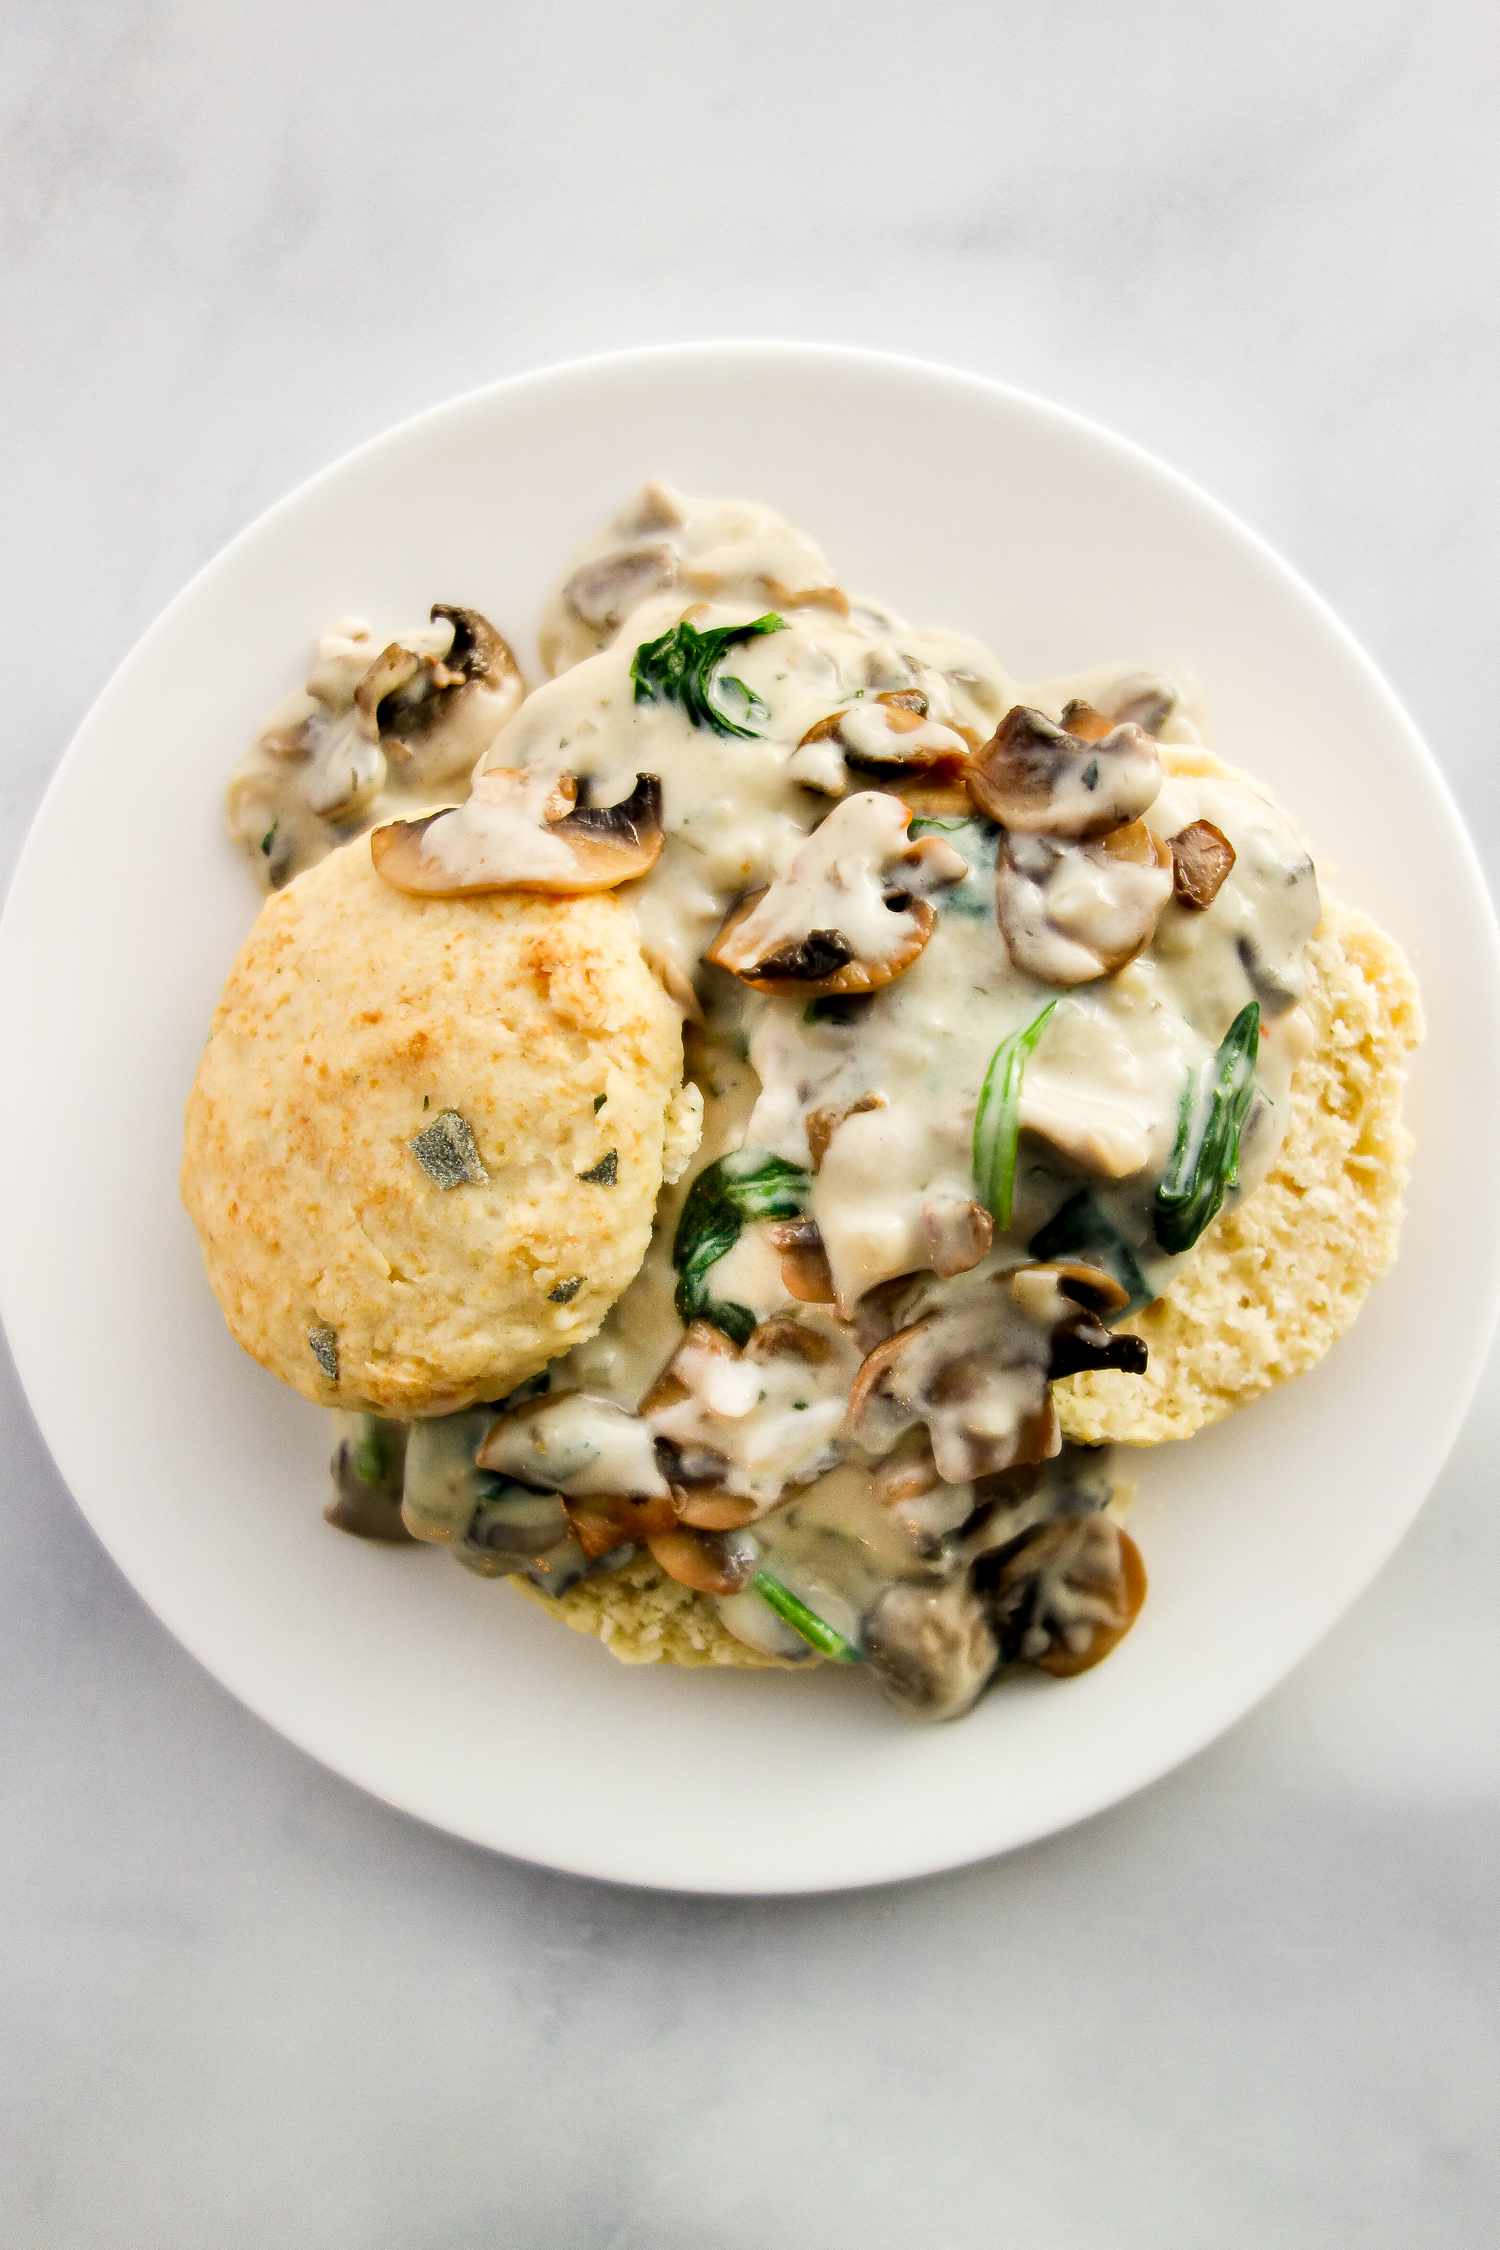 Vegetarian biscuits and gravy on a white plate.